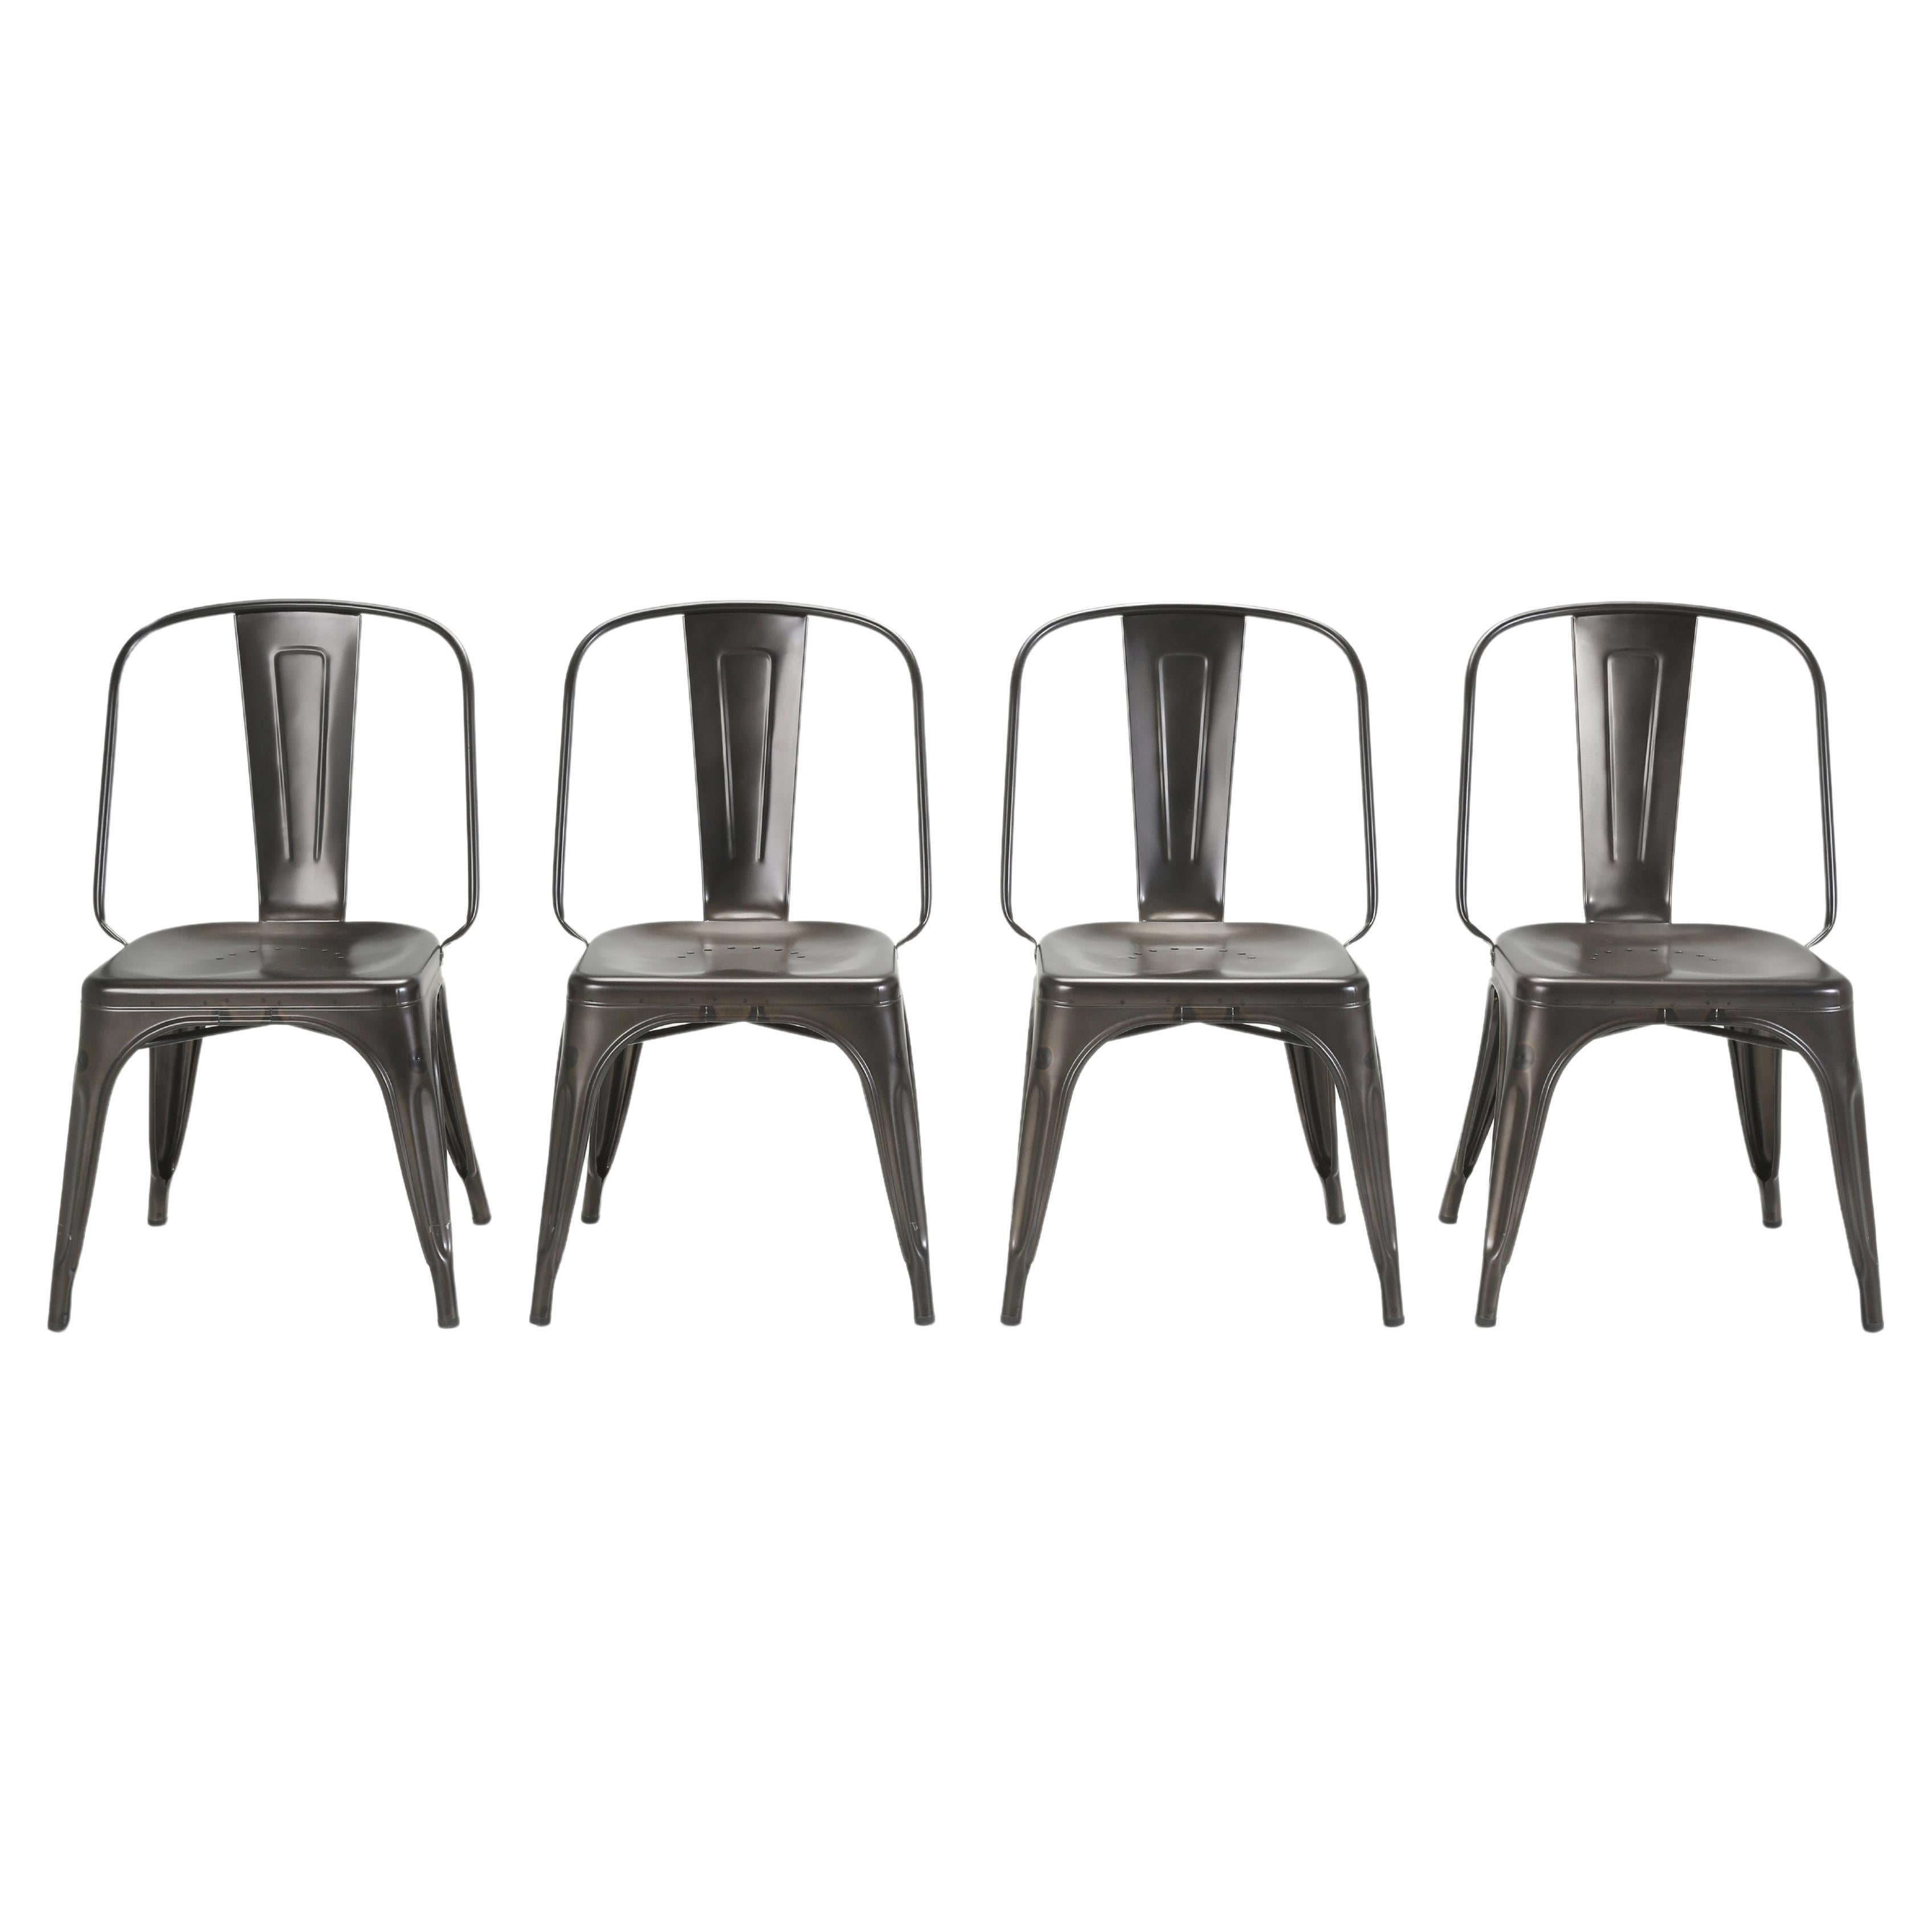 Set of (4) French Tolix AC Style Steel Stacking Chairs in Warm Gunmetal Eggshell For Sale